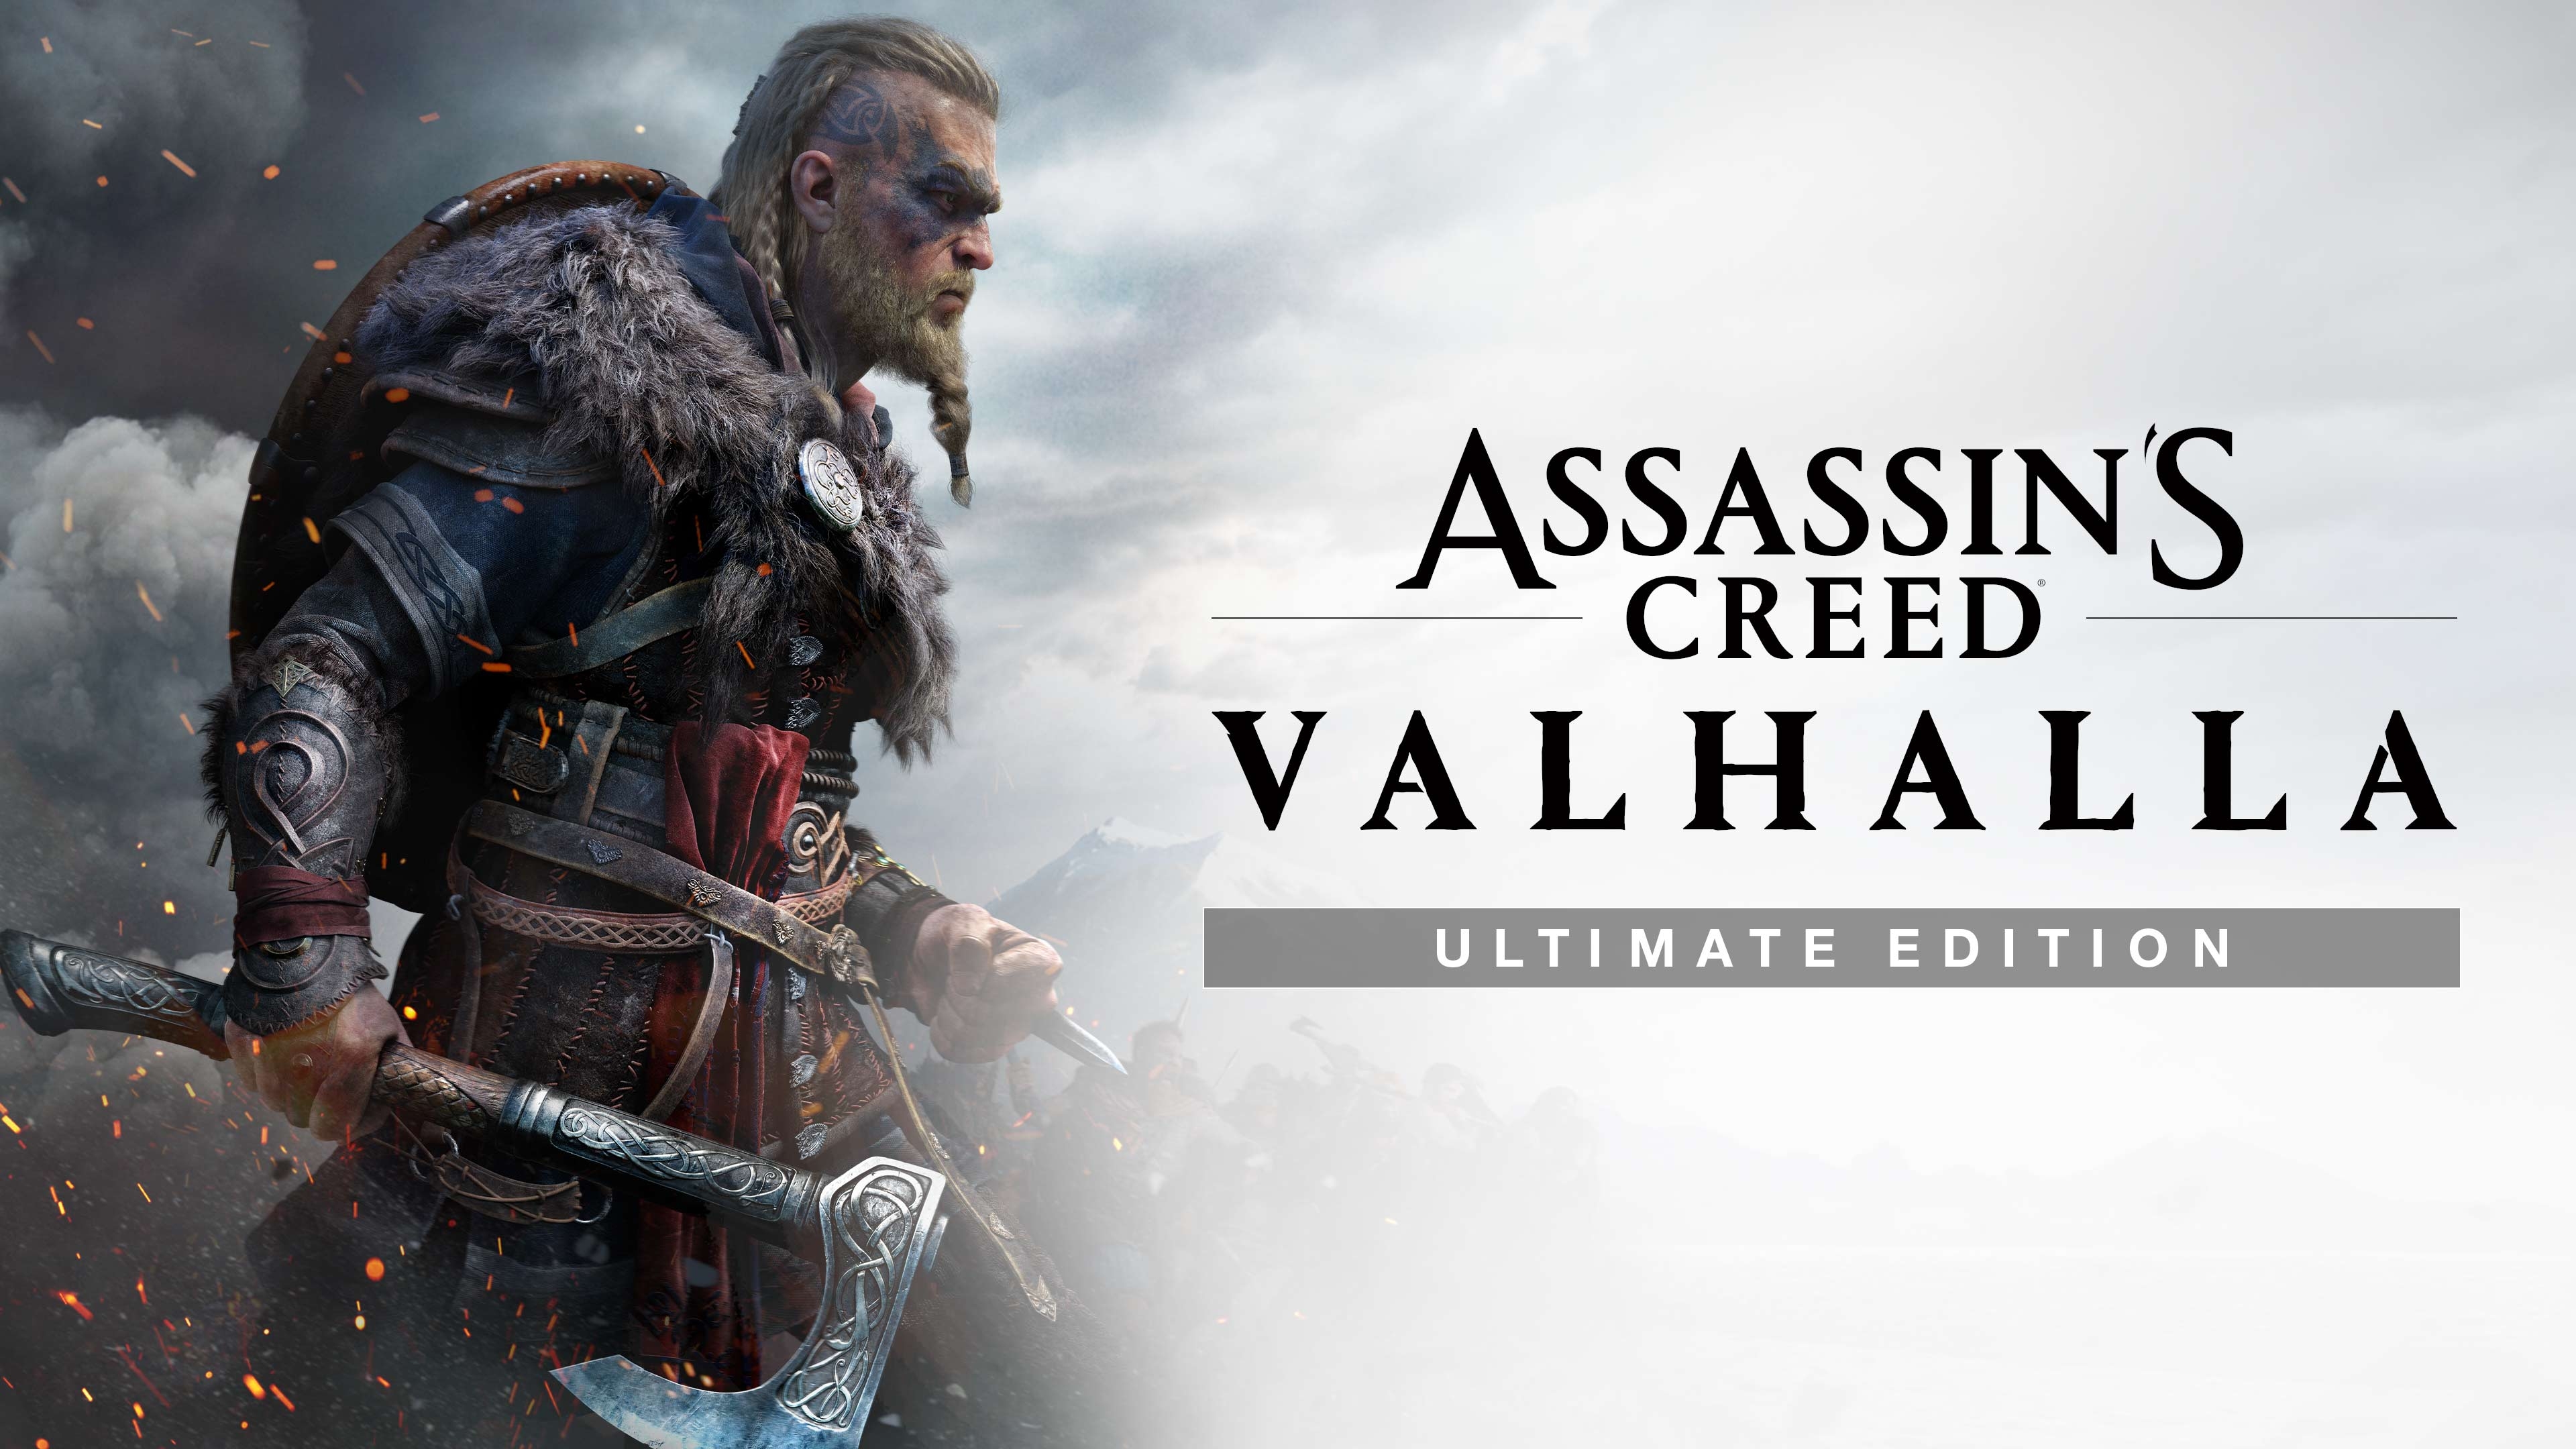 Assassin's Creed Valhalla Complete Edition EU Ubisoft Connect CD Key